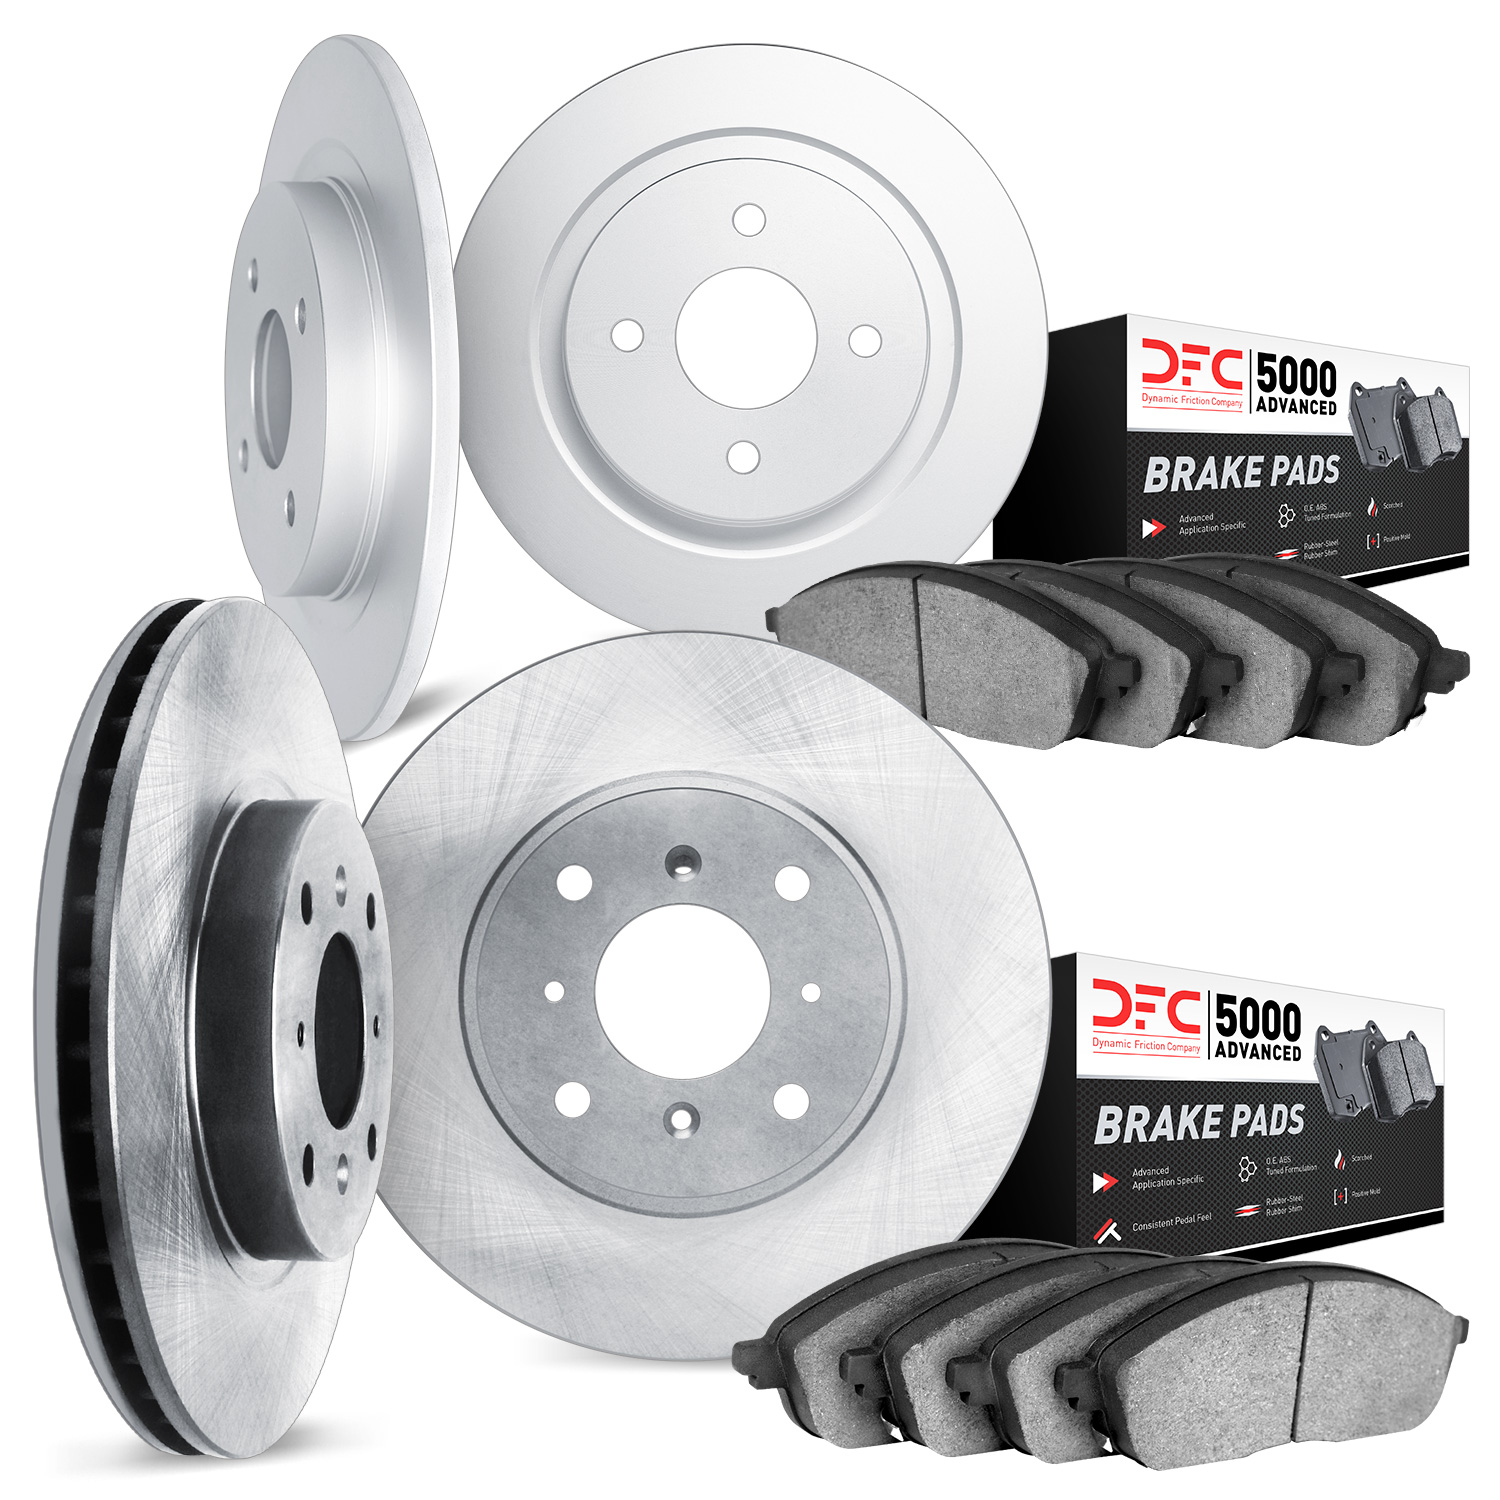 6504-27014 Brake Rotors w/5000 Advanced Brake Pads Kit, 1993-1995 Volvo, Position: Front and Rear